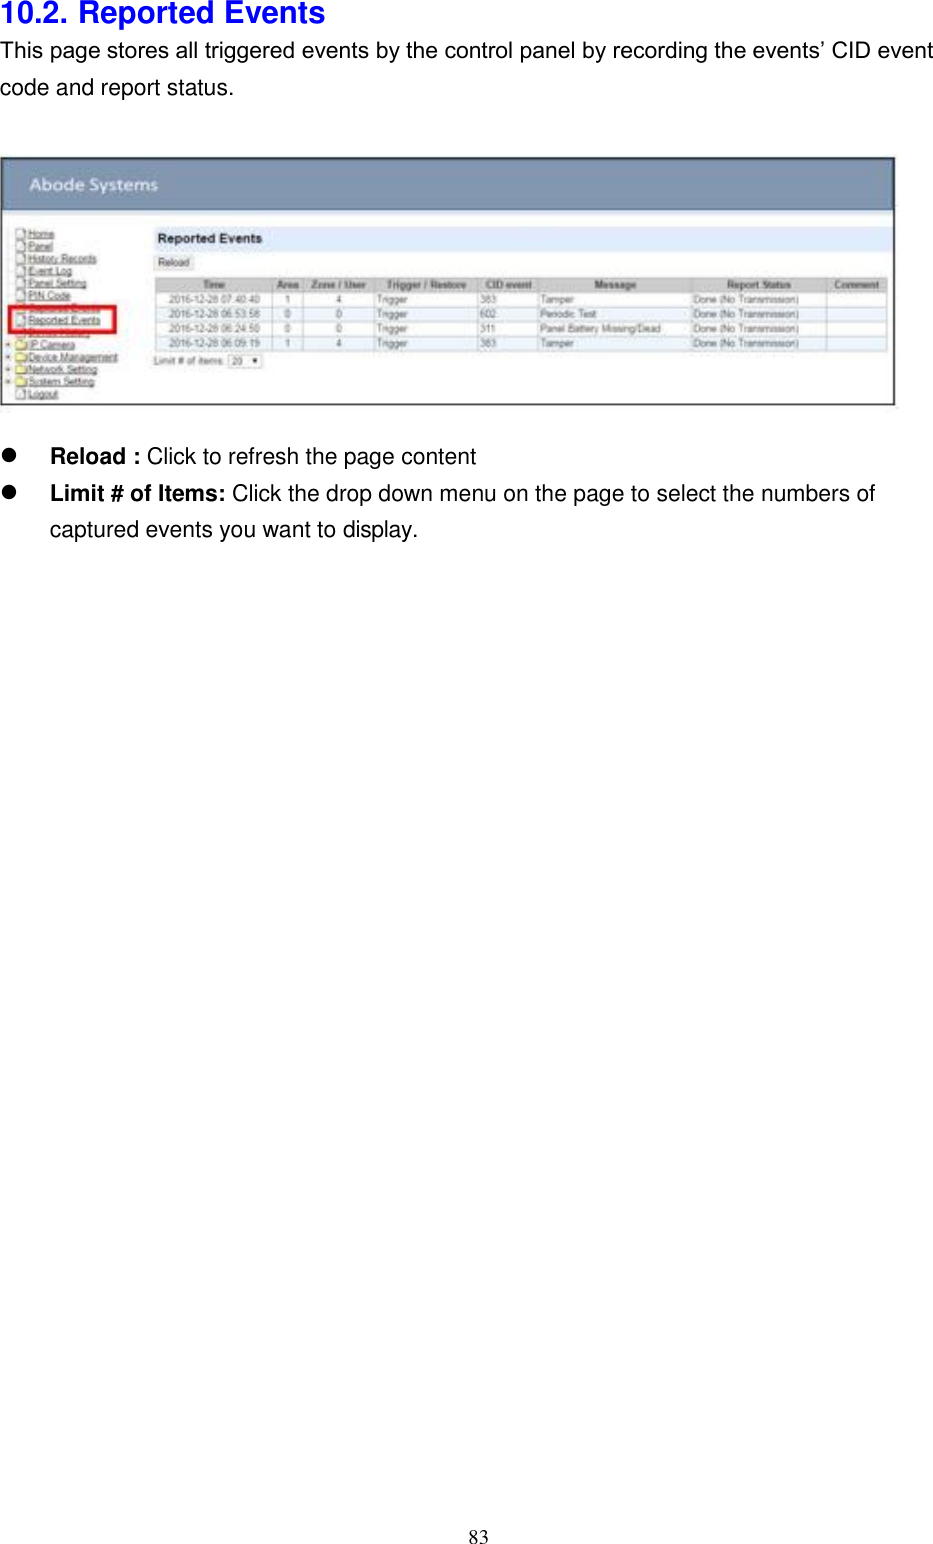 83  10.2. Reported Events This page stores all triggered events by the control panel by recording the events’ CID event code and report status.         Reload : Click to refresh the page content Limit # of Items: Click the drop down menu on the page to select the numbers of captured events you want to display.